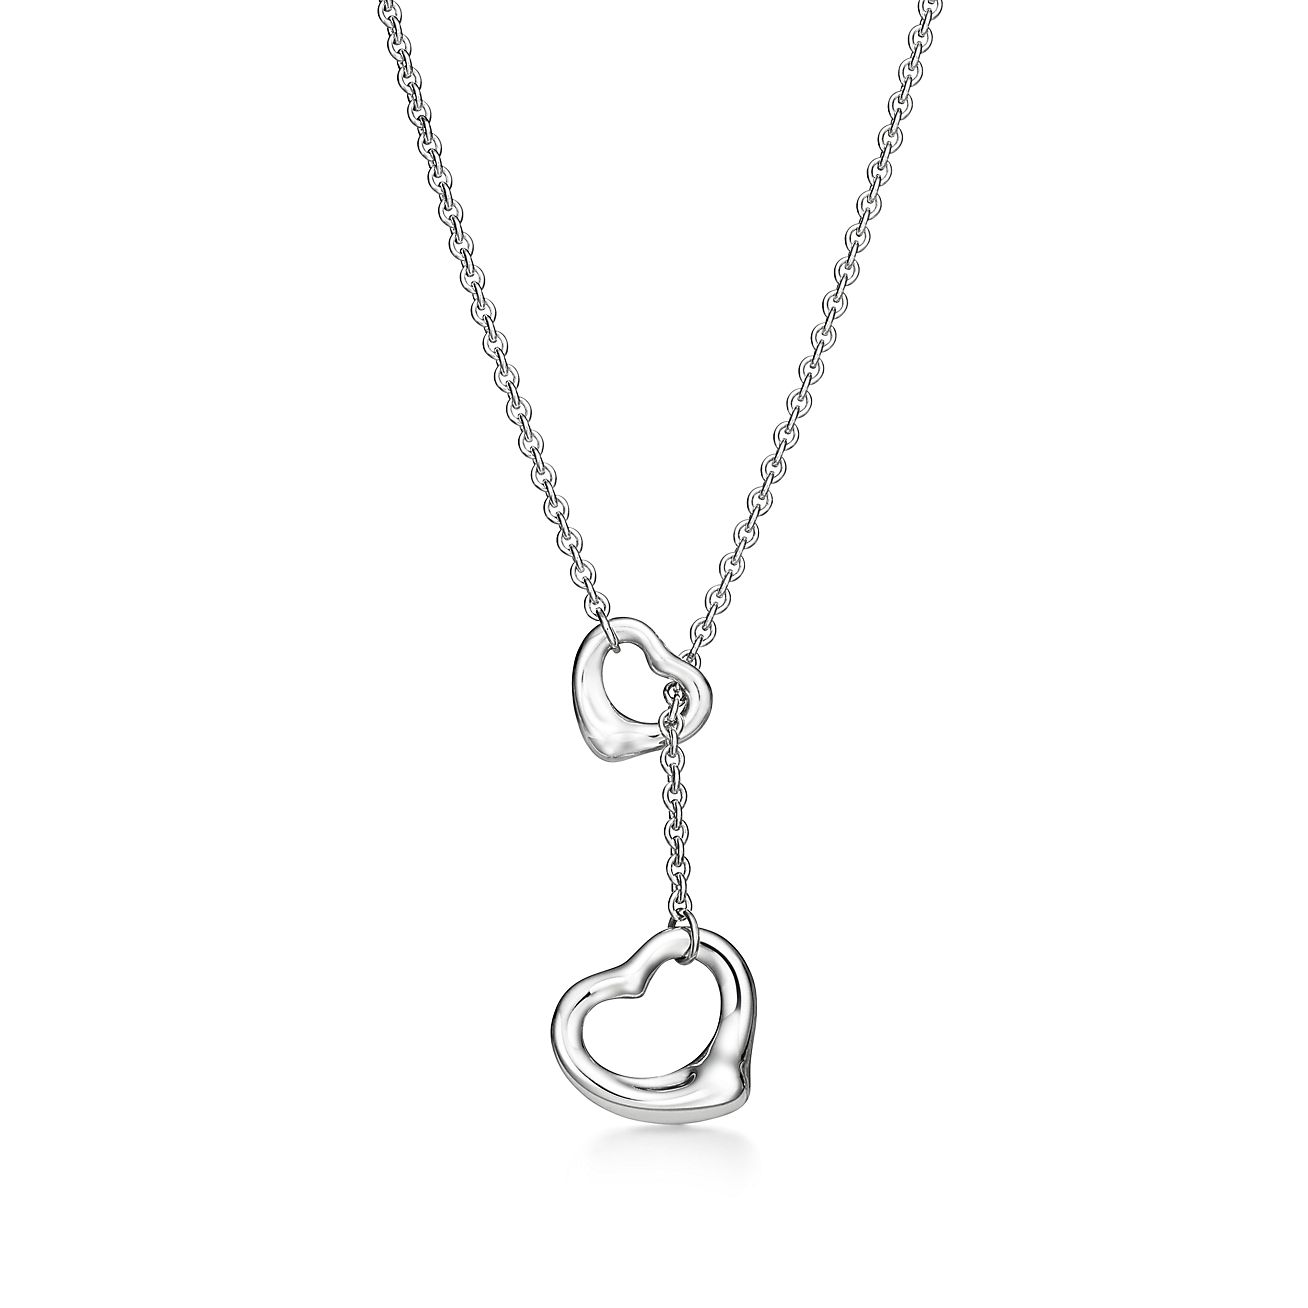 Diamond Heart Necklace with Engraved Names in Sterling Silver - MYKA